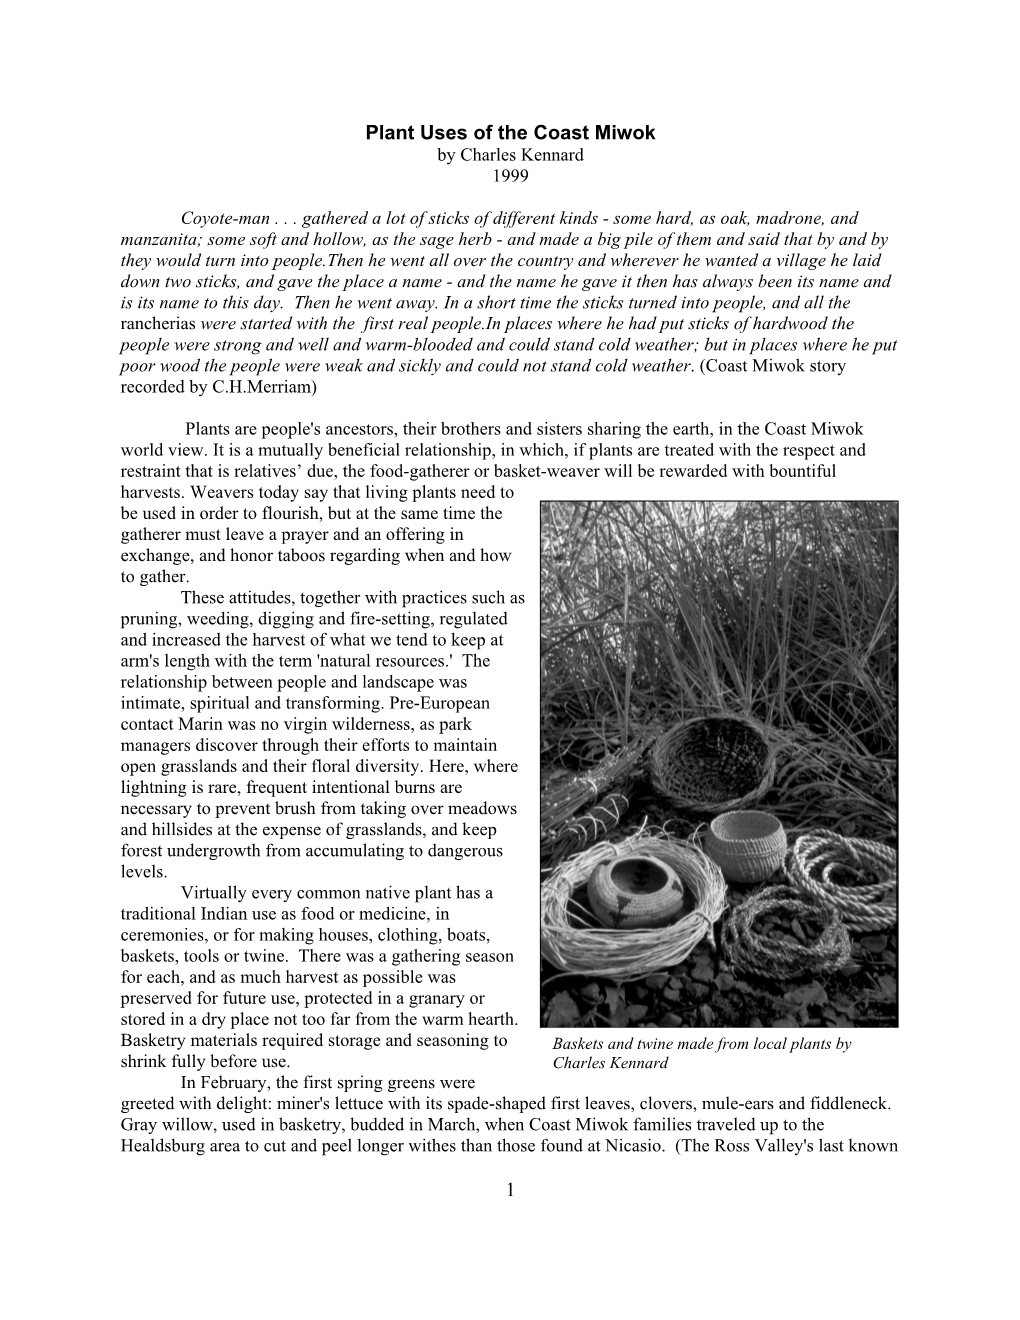 Plant Uses of the Coast Miwok by Charles Kennard 1999